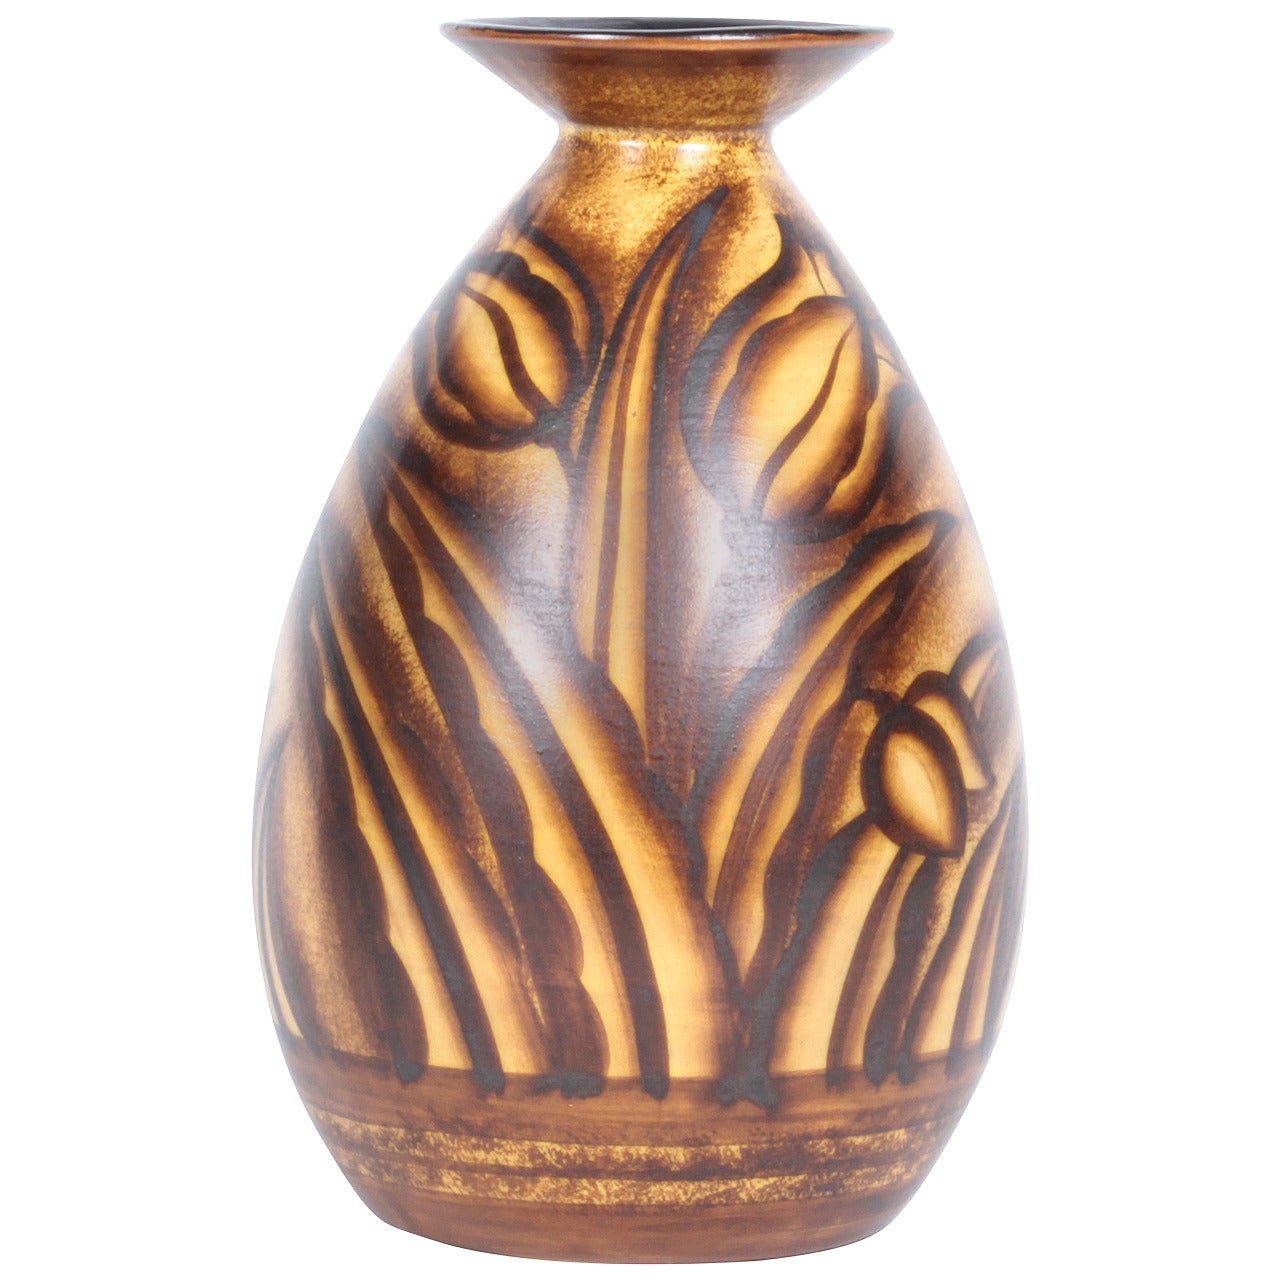 Charles Catteau for Boch Freres Keramis Belgium Glazed Pottery Vase, circa 1930 For Sale